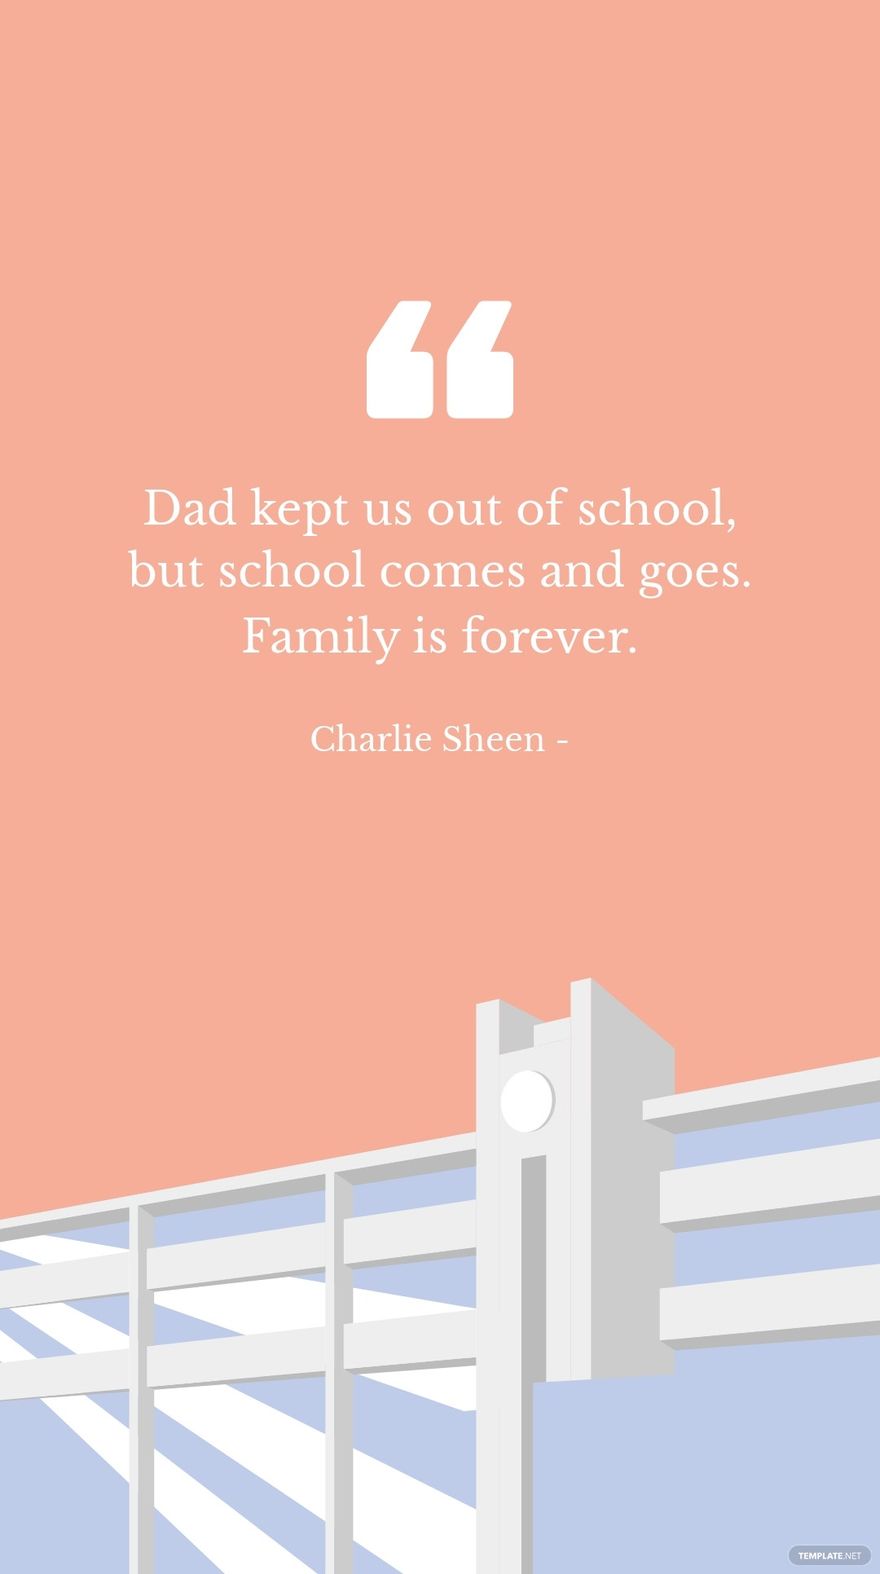 Charlie Sheen - Dad kept us out of school, but school comes and goes. Family is forever. in JPG